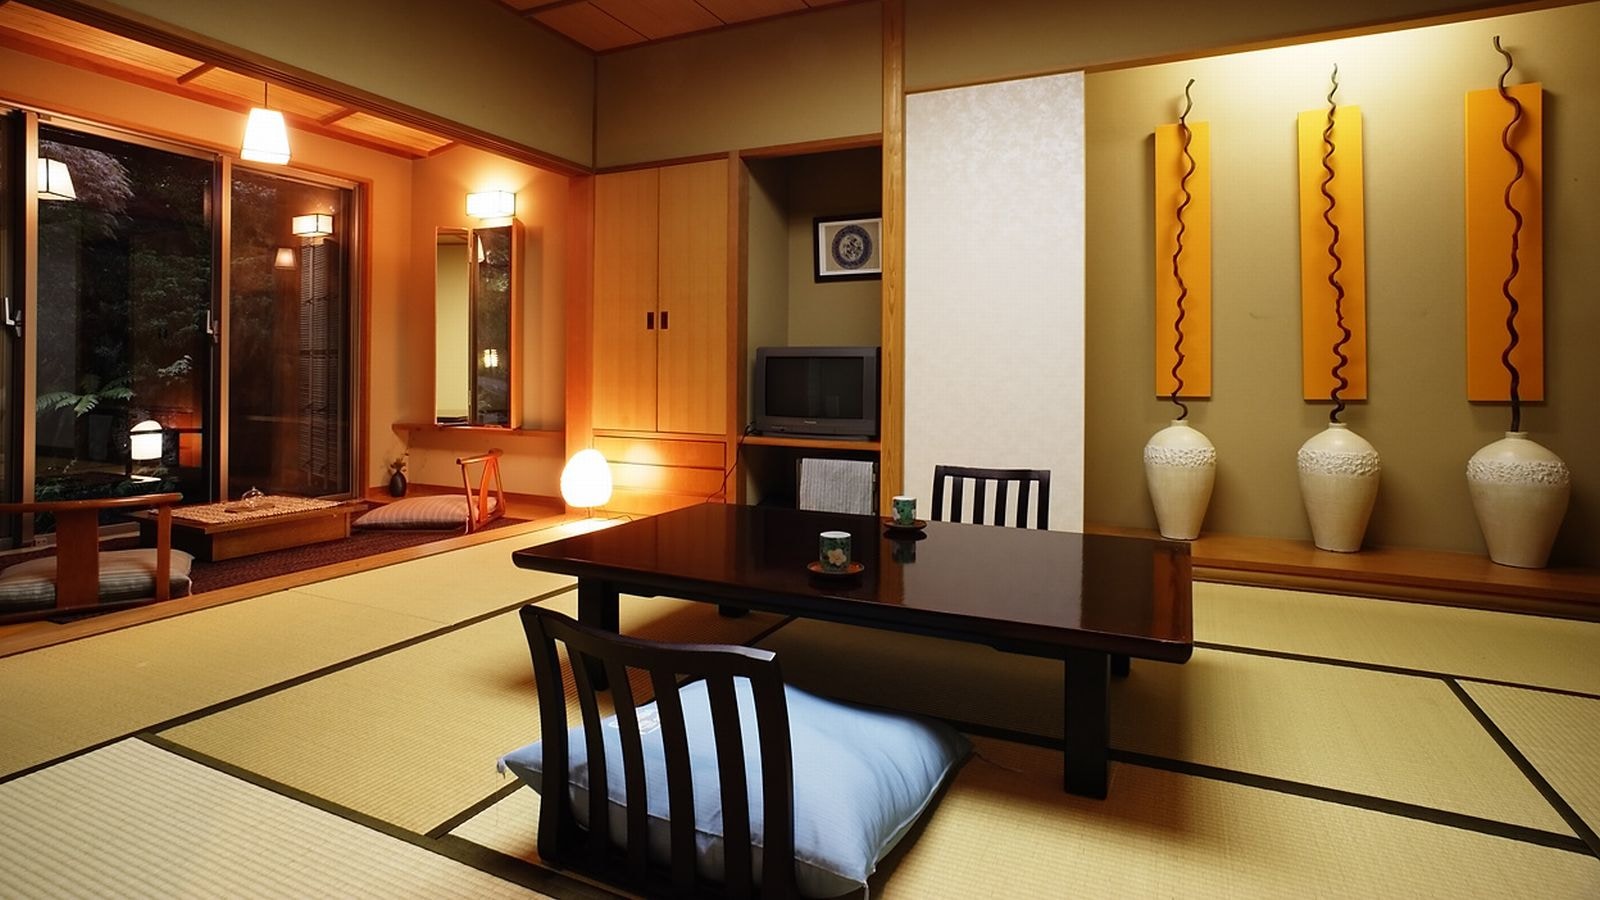 ■ Free-flowing from private source ■ Guest room with open-air bath [Kairai] No smoking